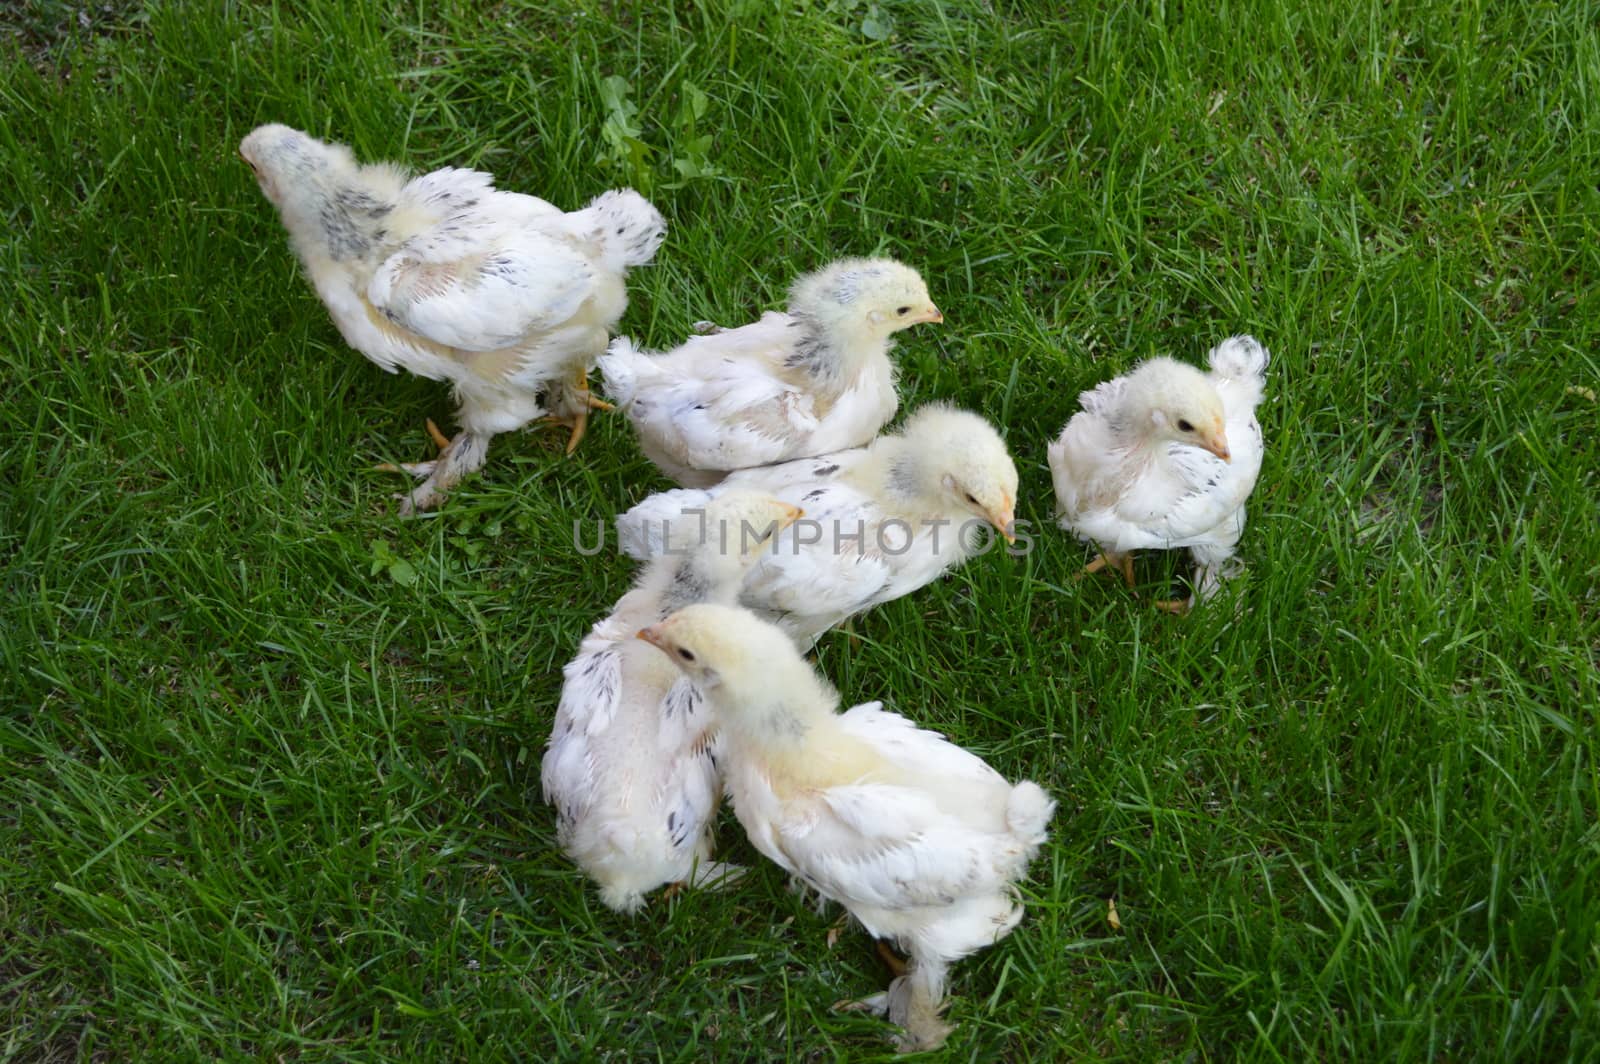 Small chicks in the grass